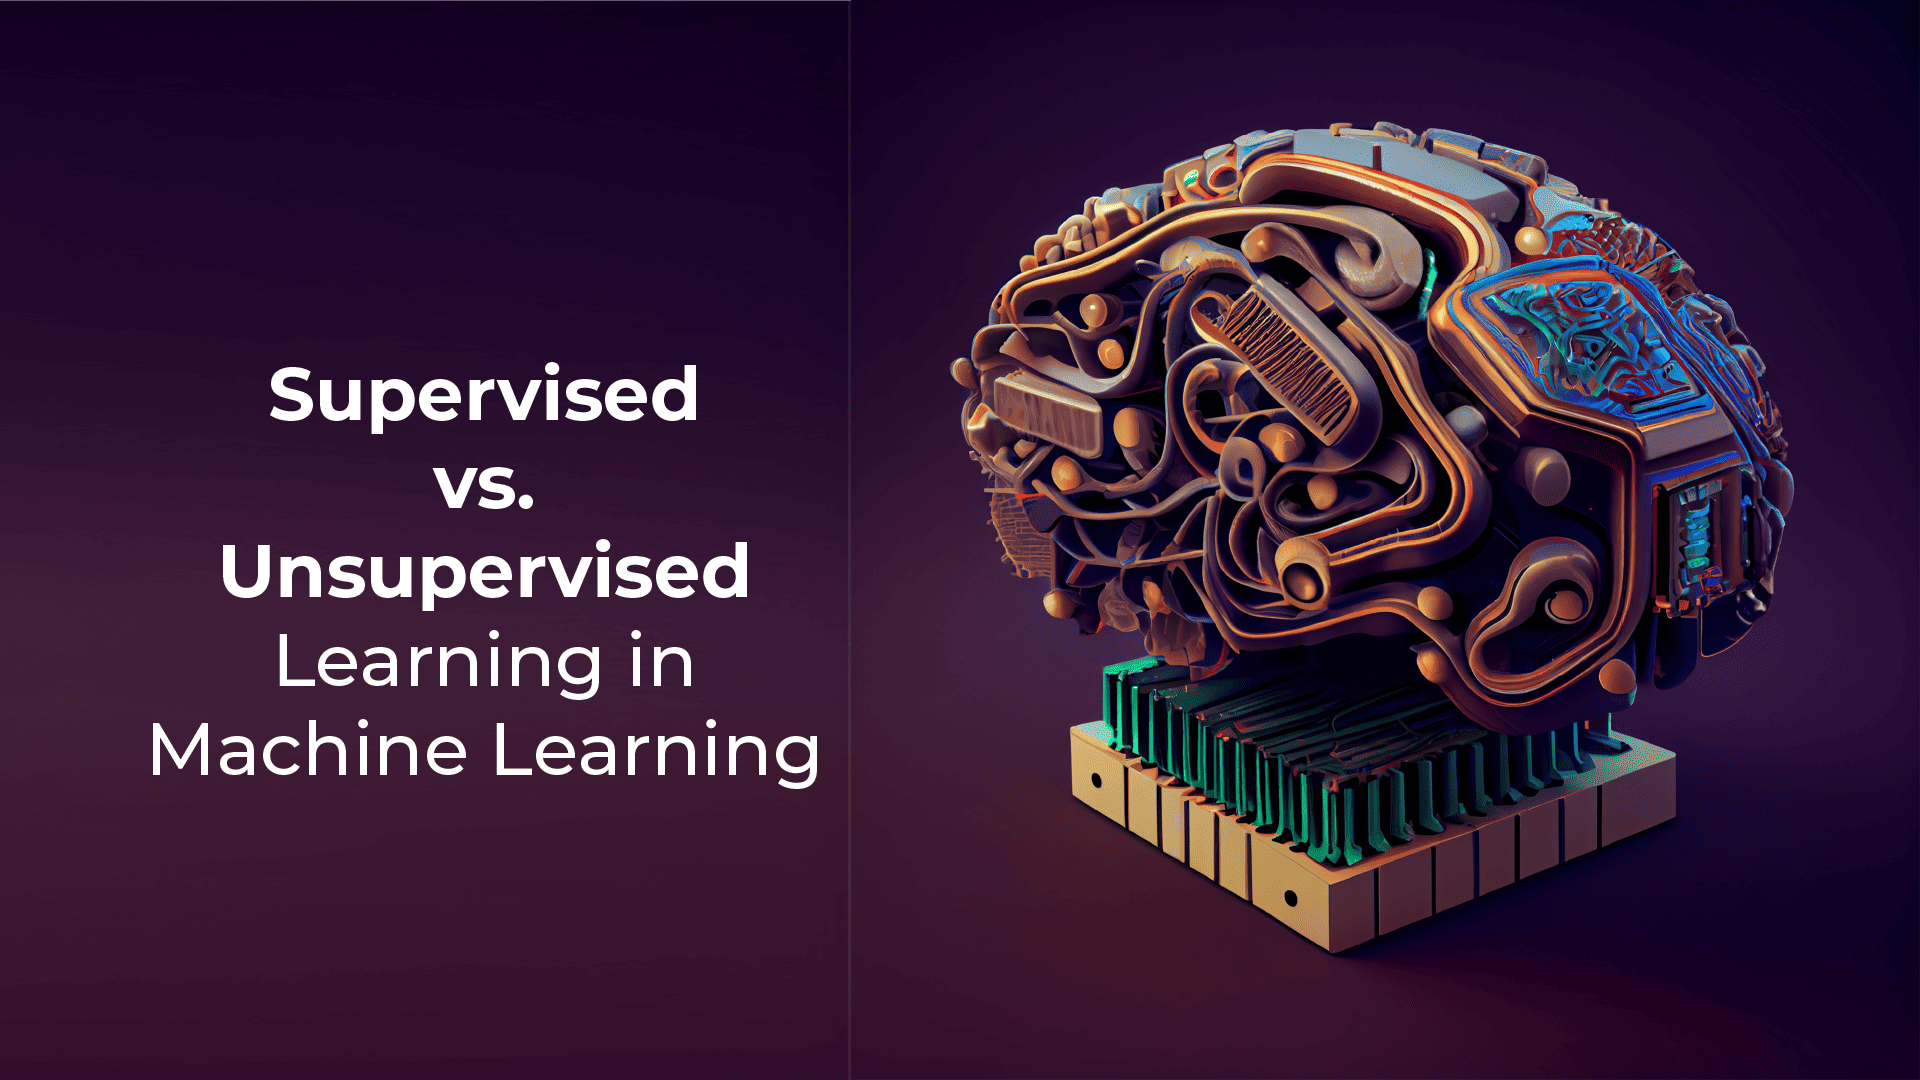 Supervised vs. Unsupervised Learning in Machine Learning